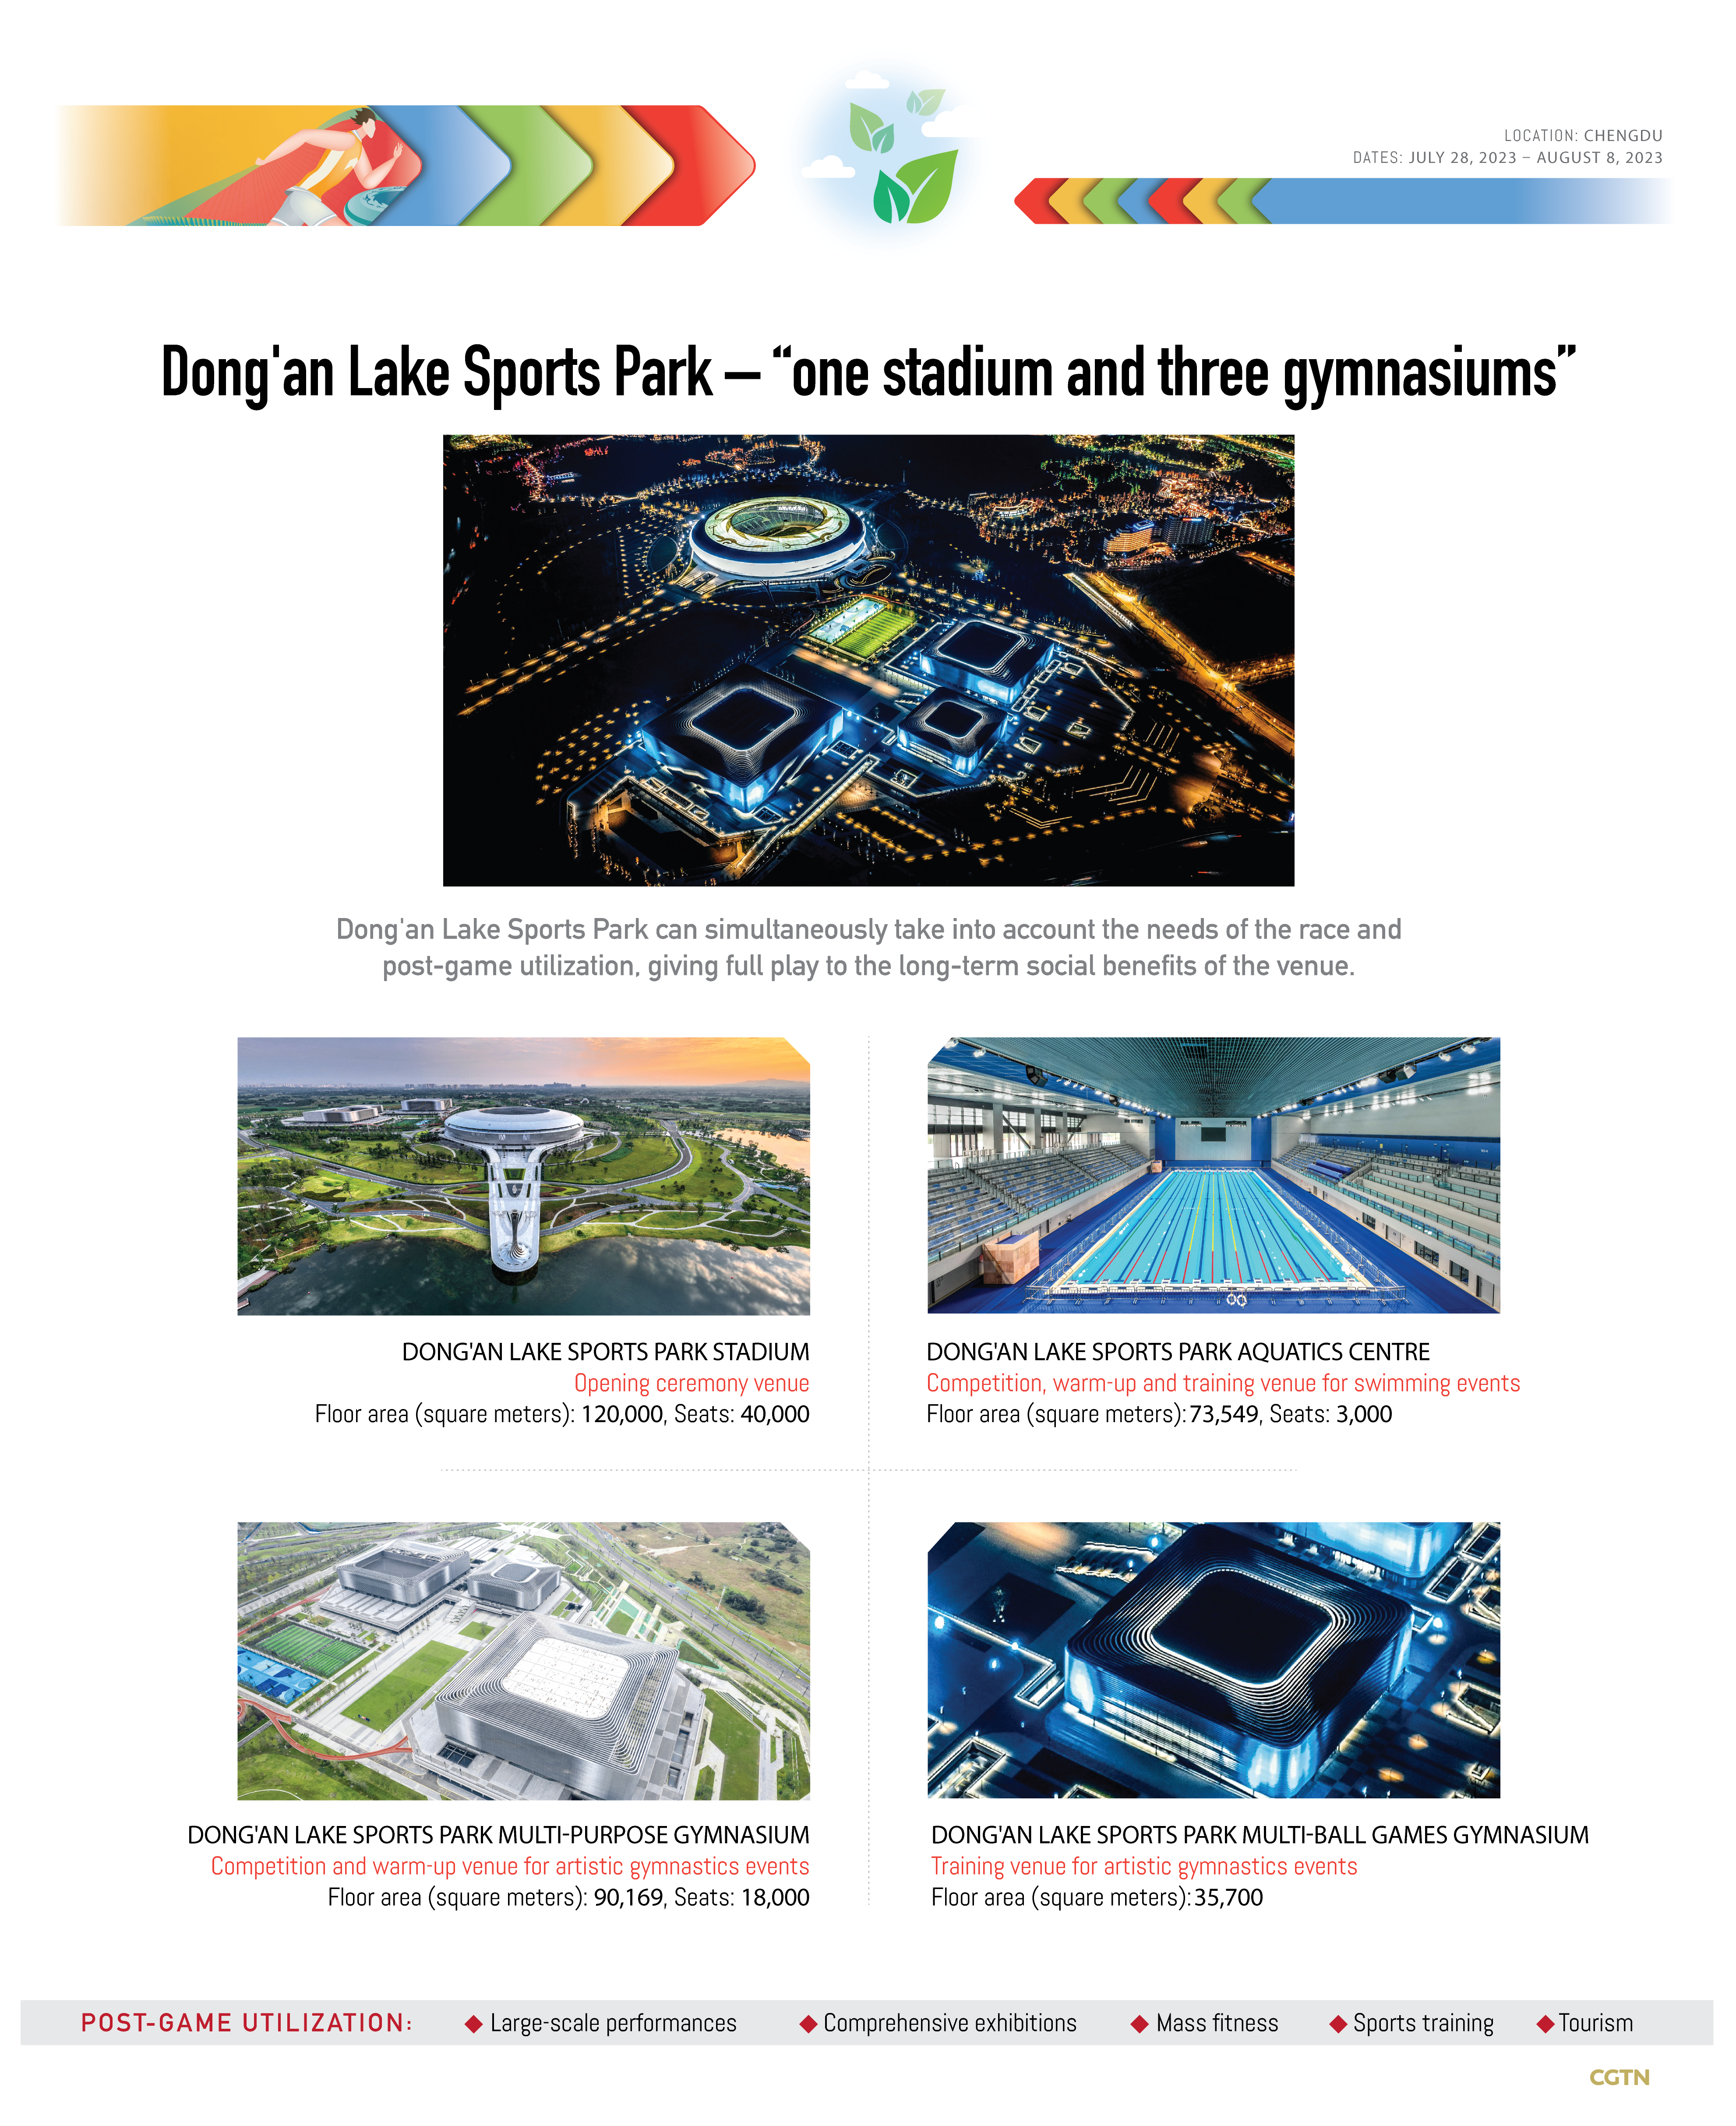 Unboxing the green Universiade: Dong'an Lake Sports Park